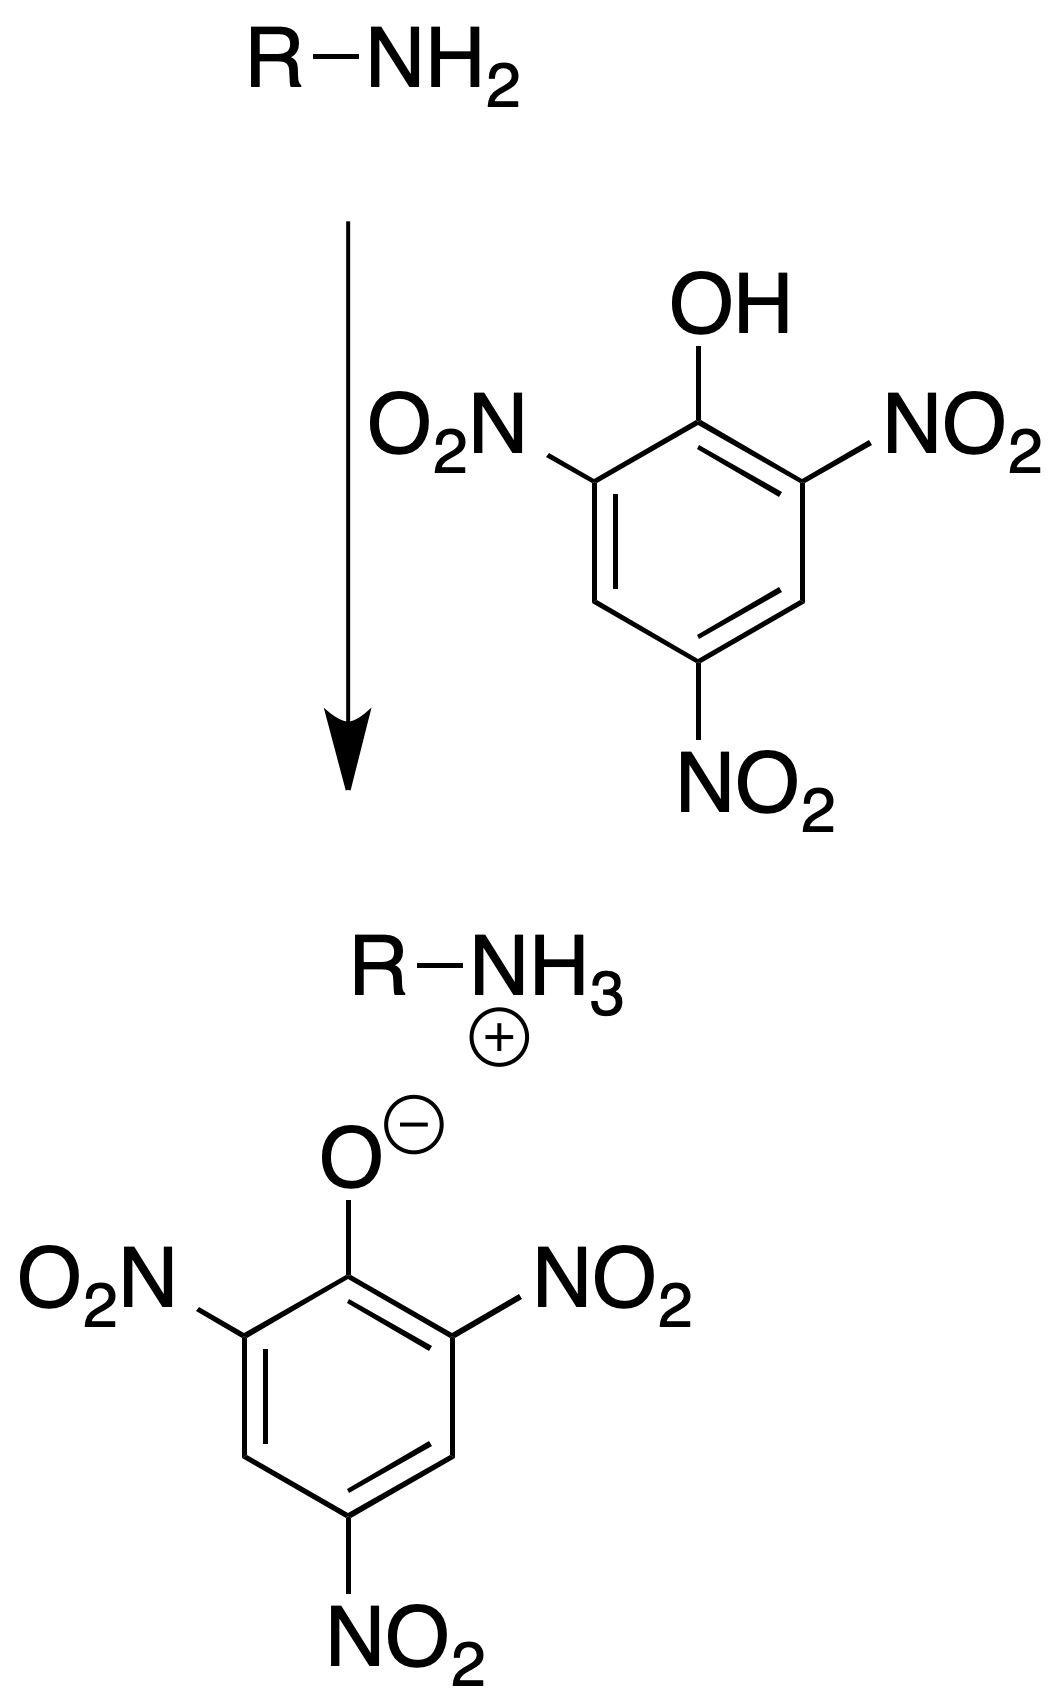 amines analysis acetamide formation